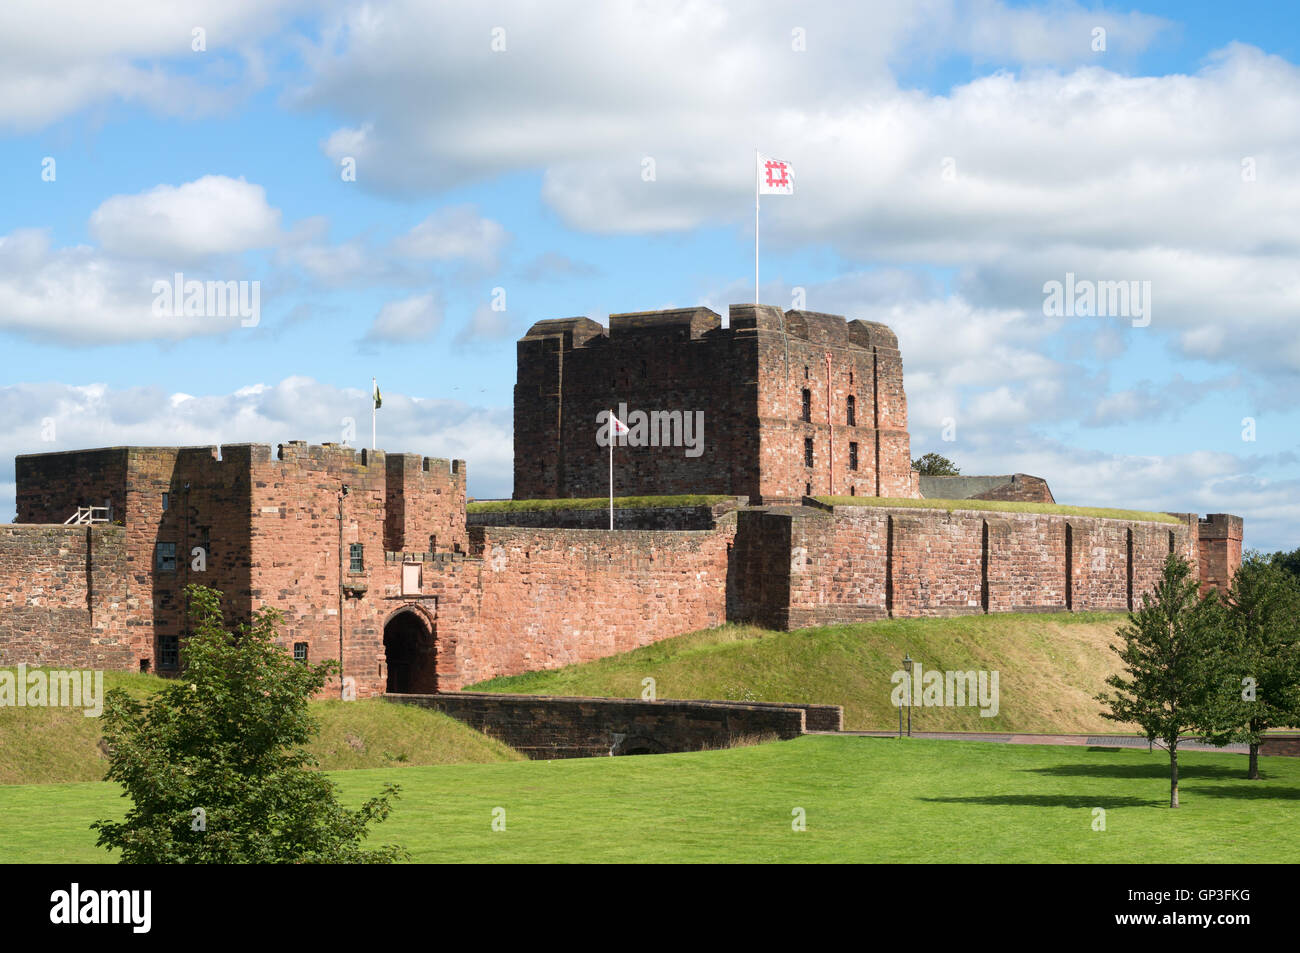 Carlisle castle keep and outer wall, with English Heritage flag flying, Cumbria, England, UK Stock Photo